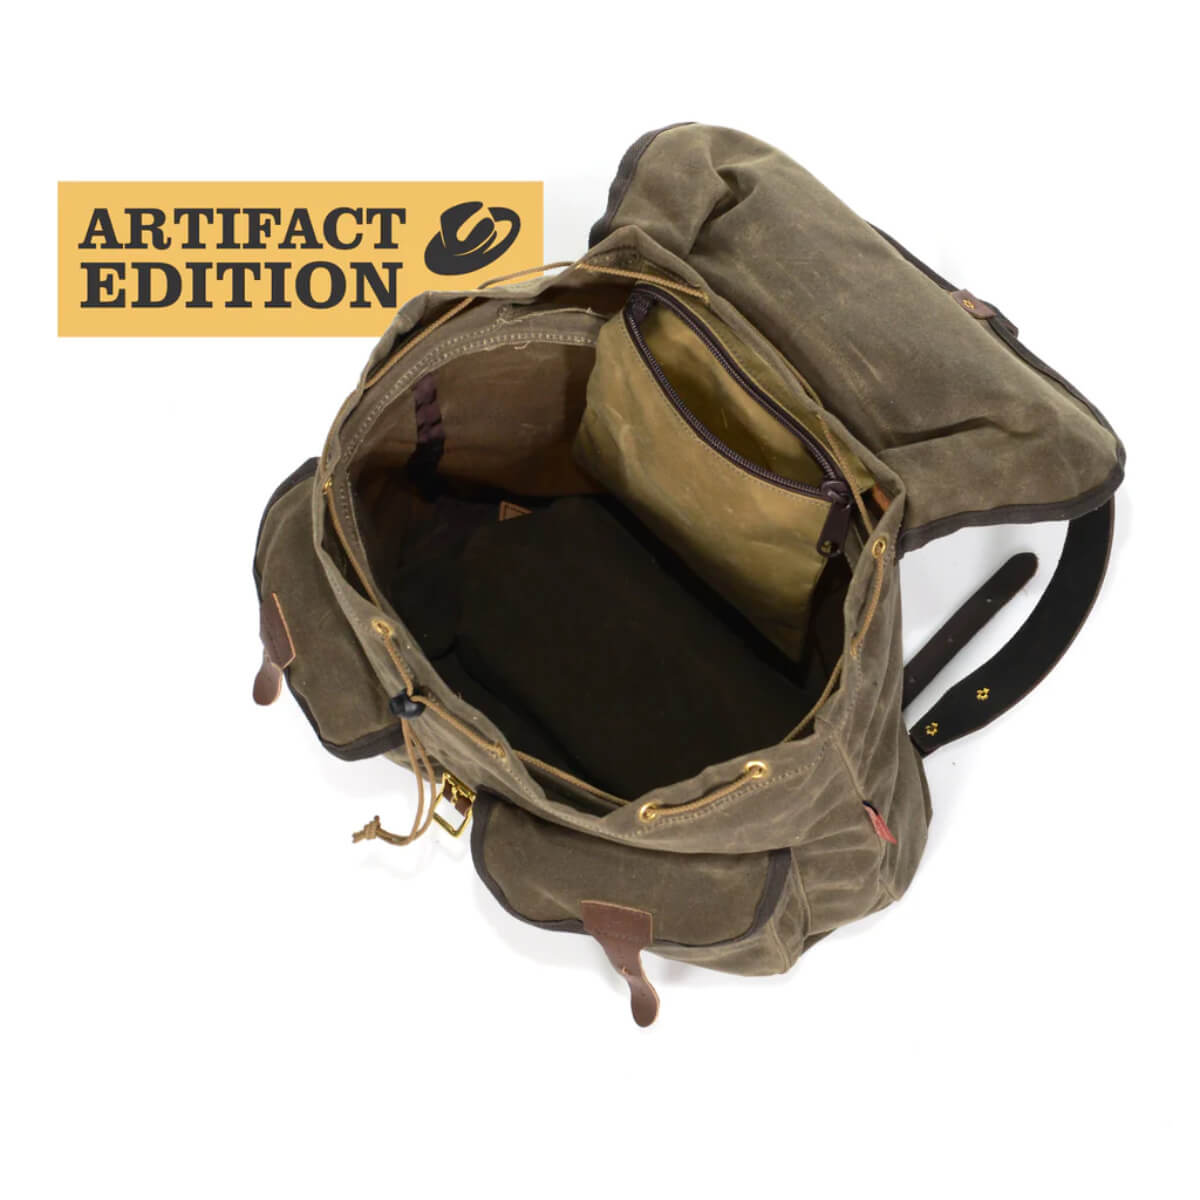 Frost River Geologist Pack - Artifact Edition